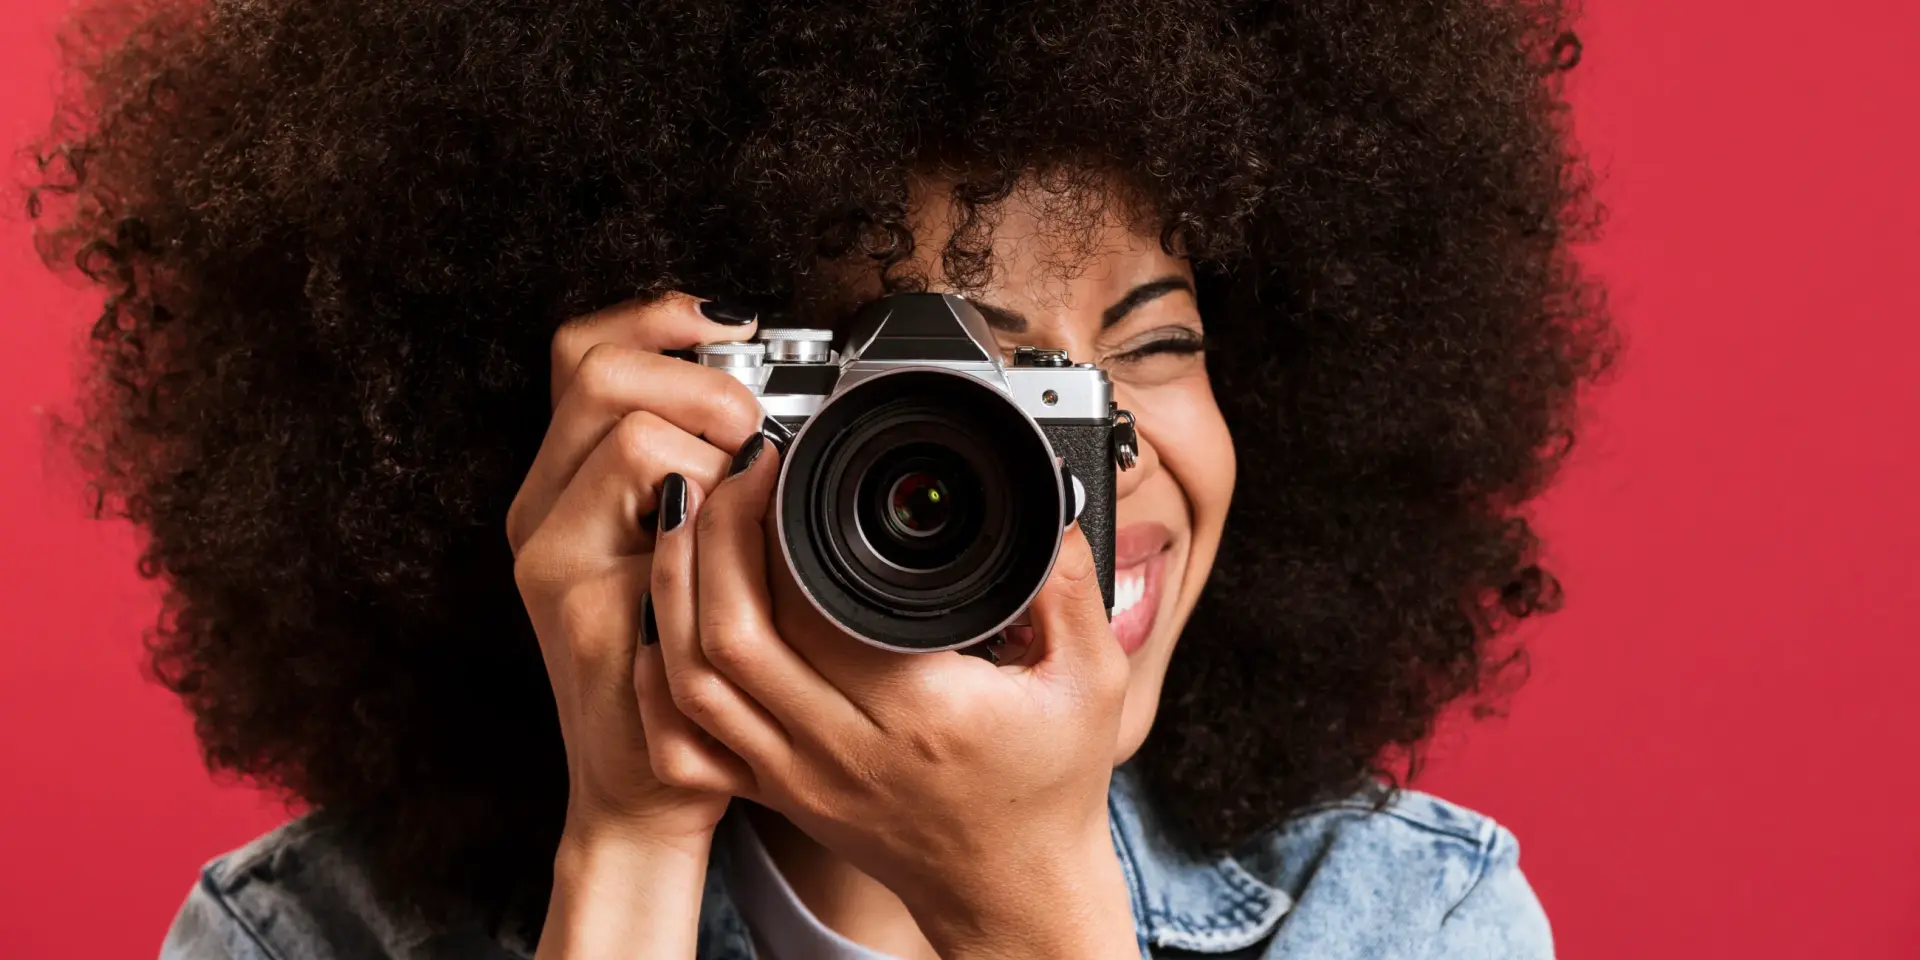 A female photographer holding a camera and smiling.